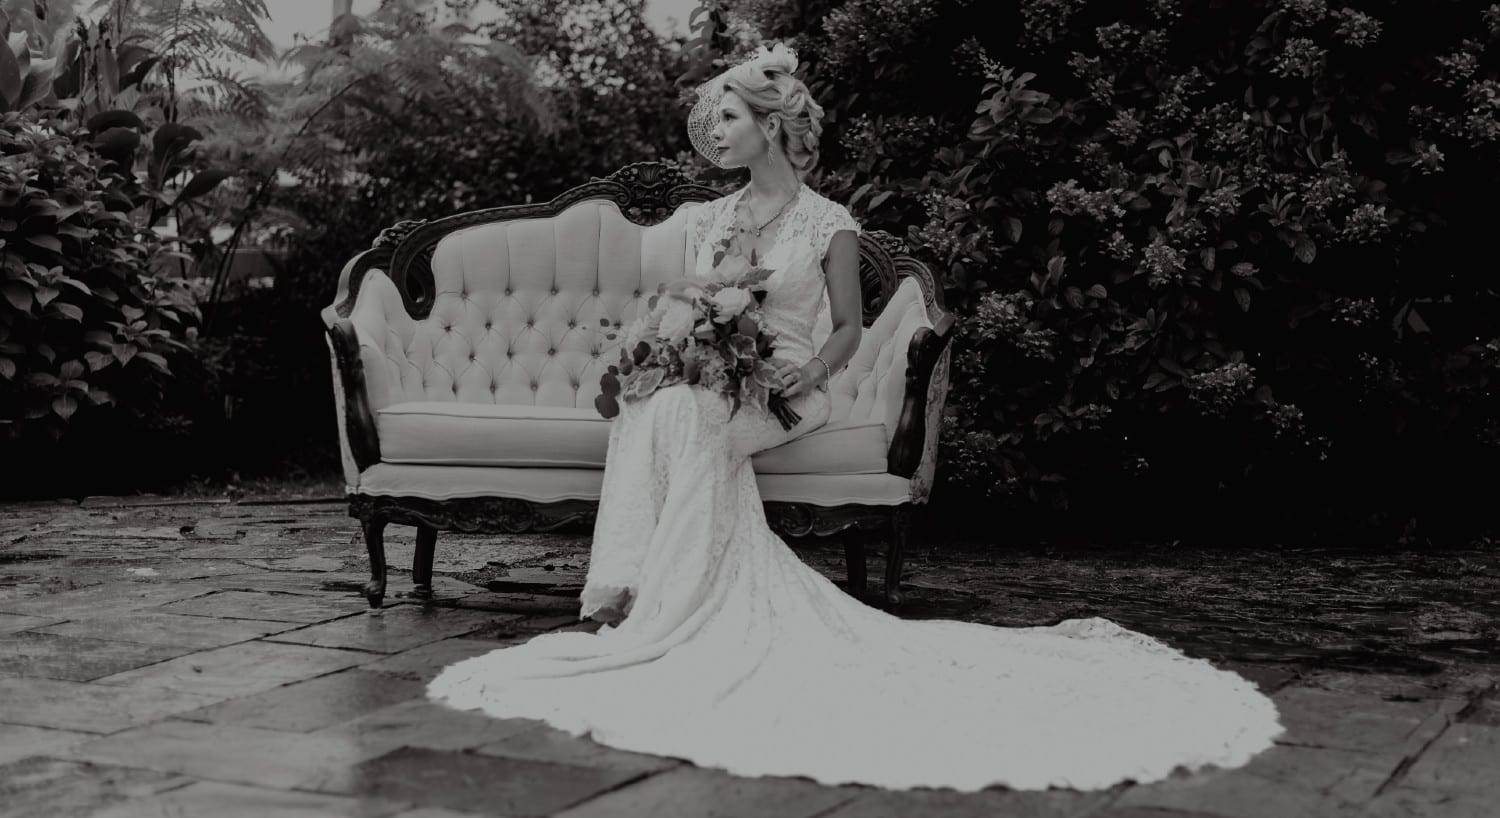 Black and white photograph of a bride in white with a bouquet sitting on an antique loveseat outdoors